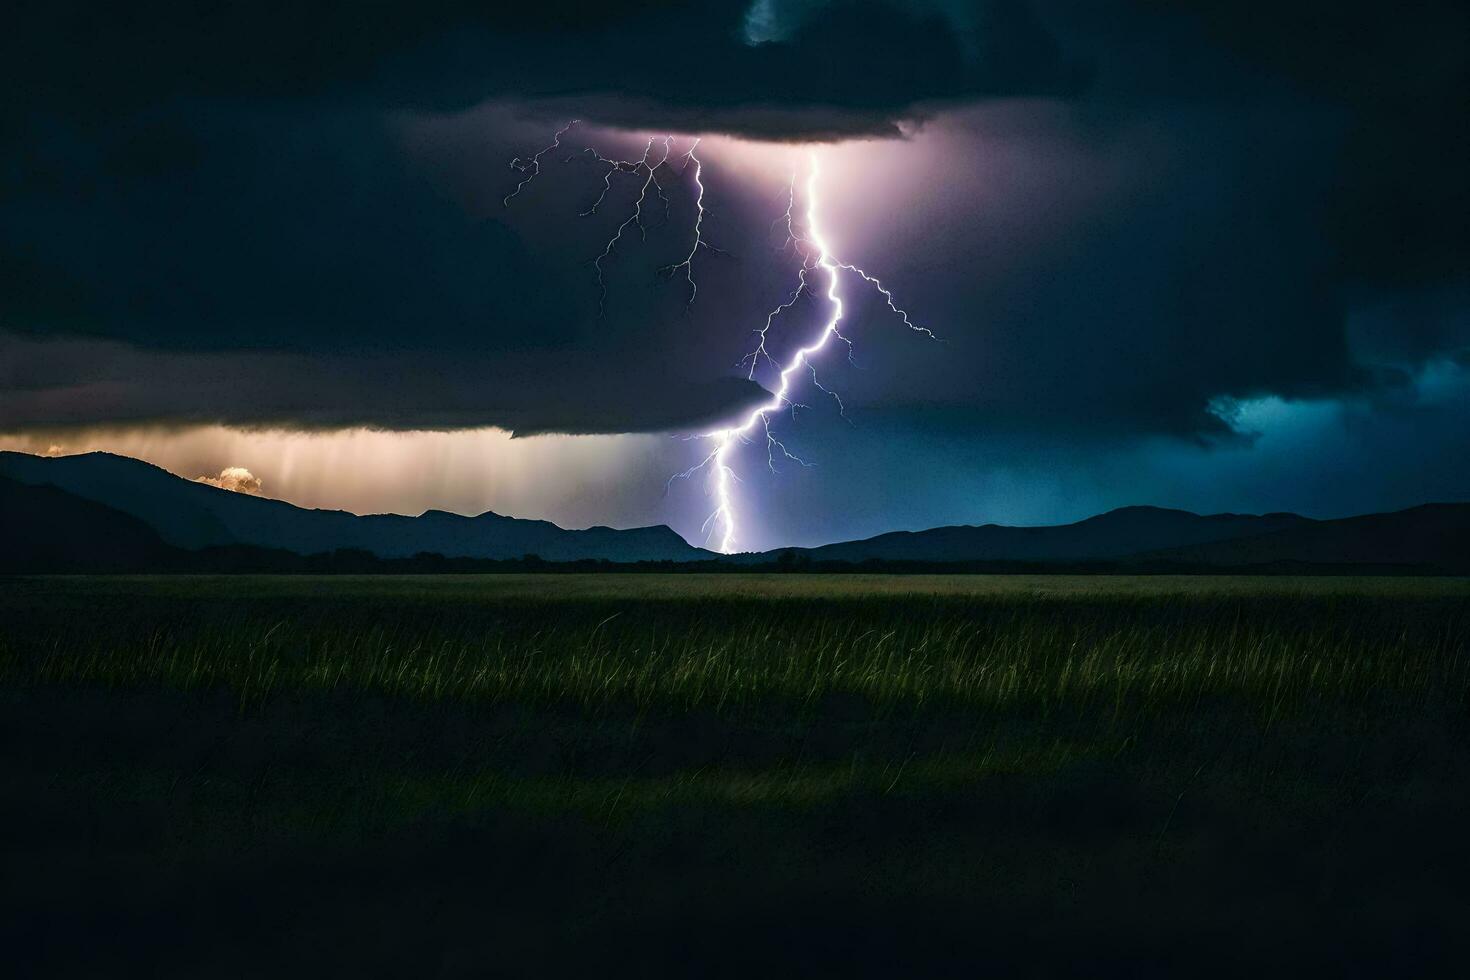 AI generated a lightning bolt strikes through the sky over a field photo